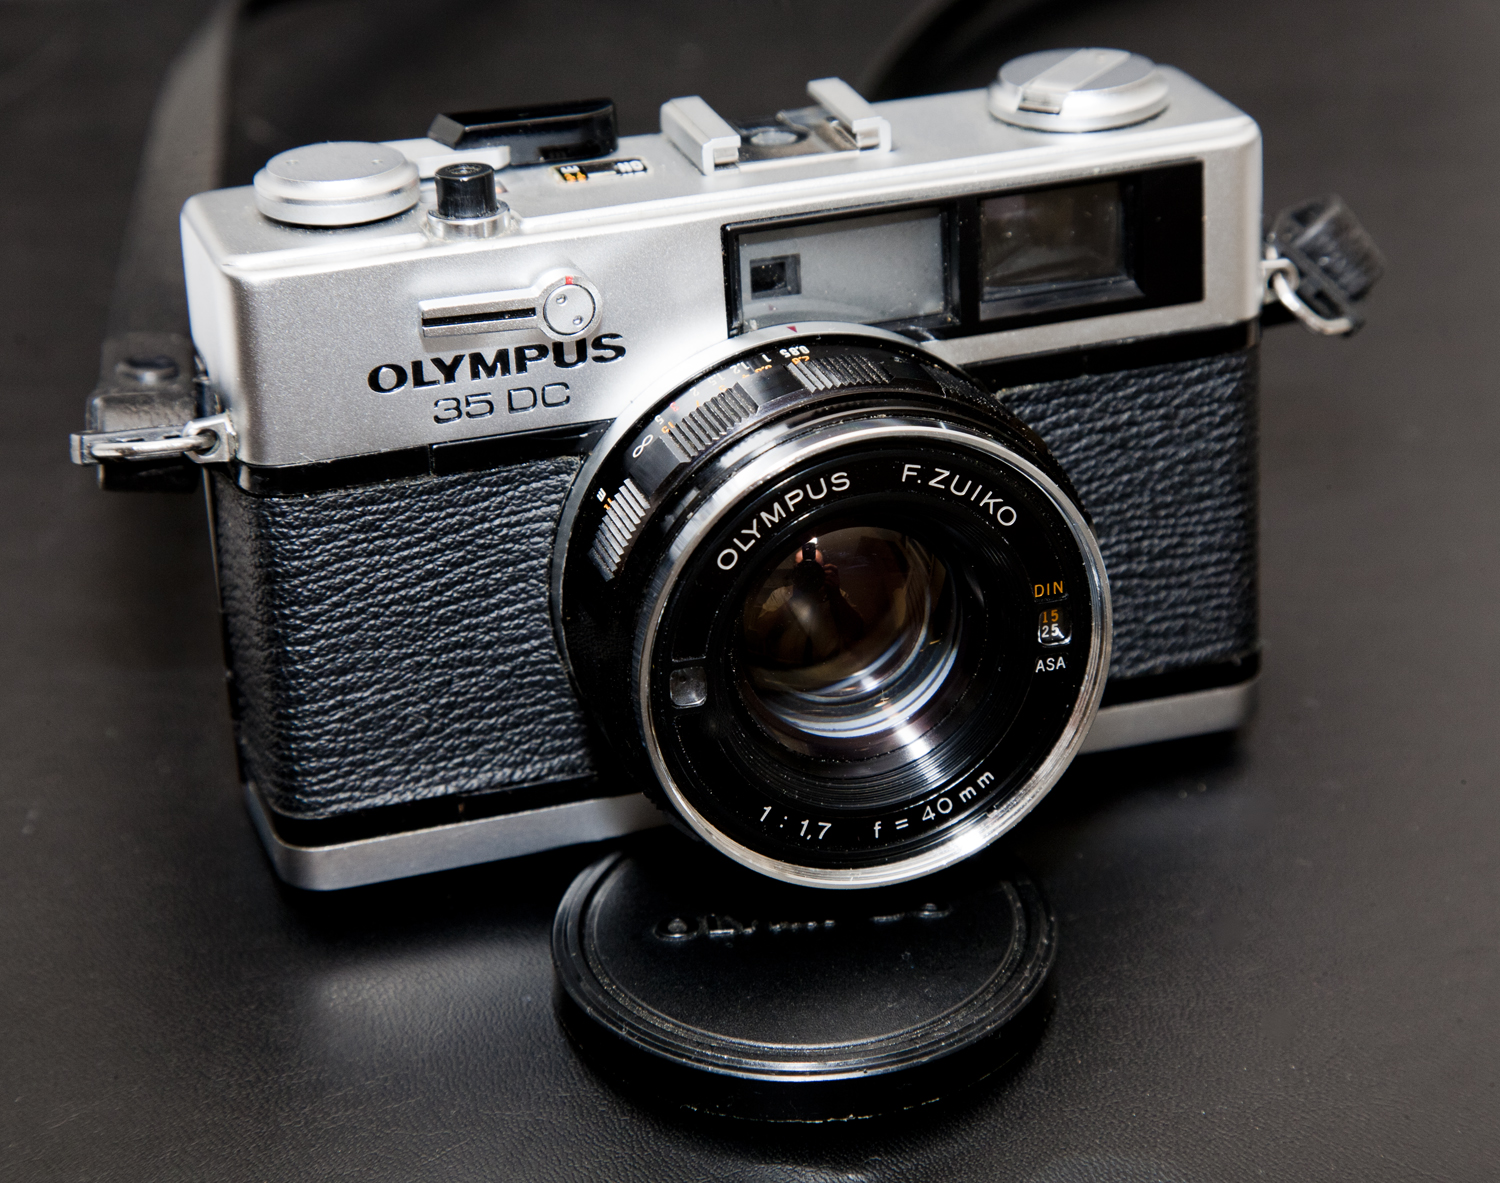 It's been a long time coming – the Olympus 35 DC | The Obscure